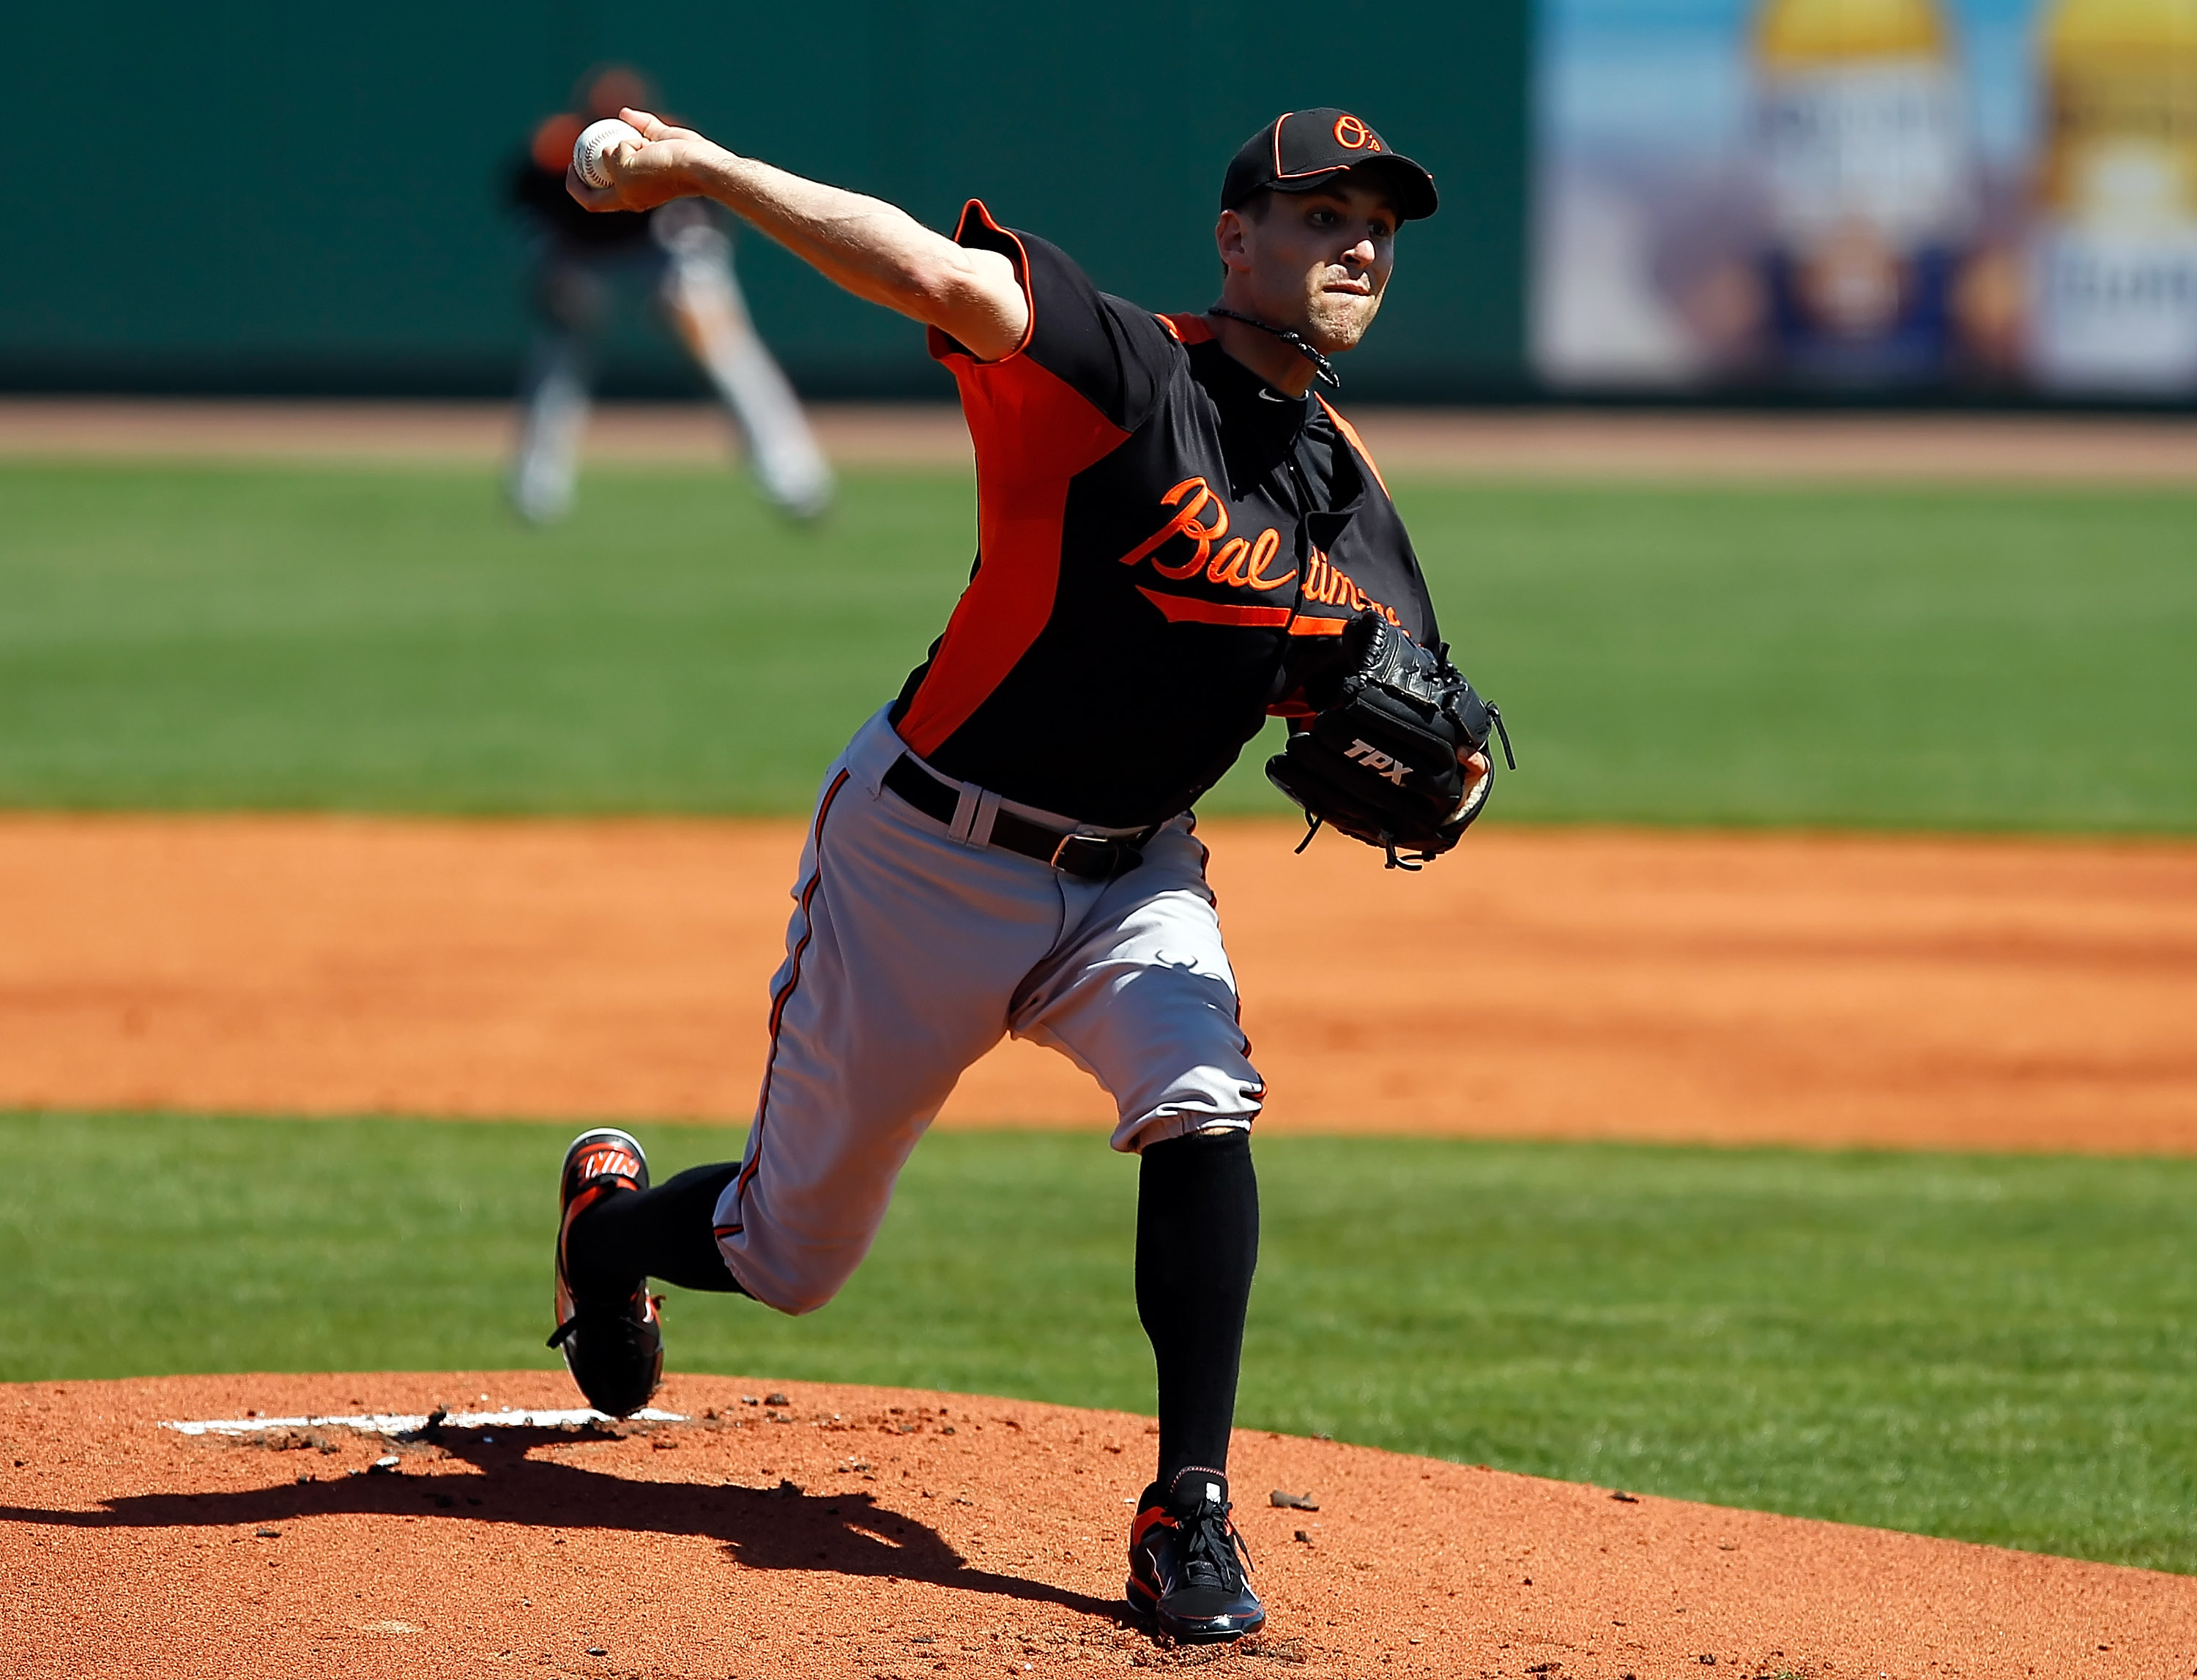 BRADENTON, FL - FEBRUARY 28:  Pitcher Brad Bergesen #35 of the Baltimore Orioles pitches against the Pittsburgh Pirates during a Grapefruit League Spring Training Game at McKechnie Field on February 28, 2011 in Bradenton, Florida.  (Photo by J. Meric/Gett